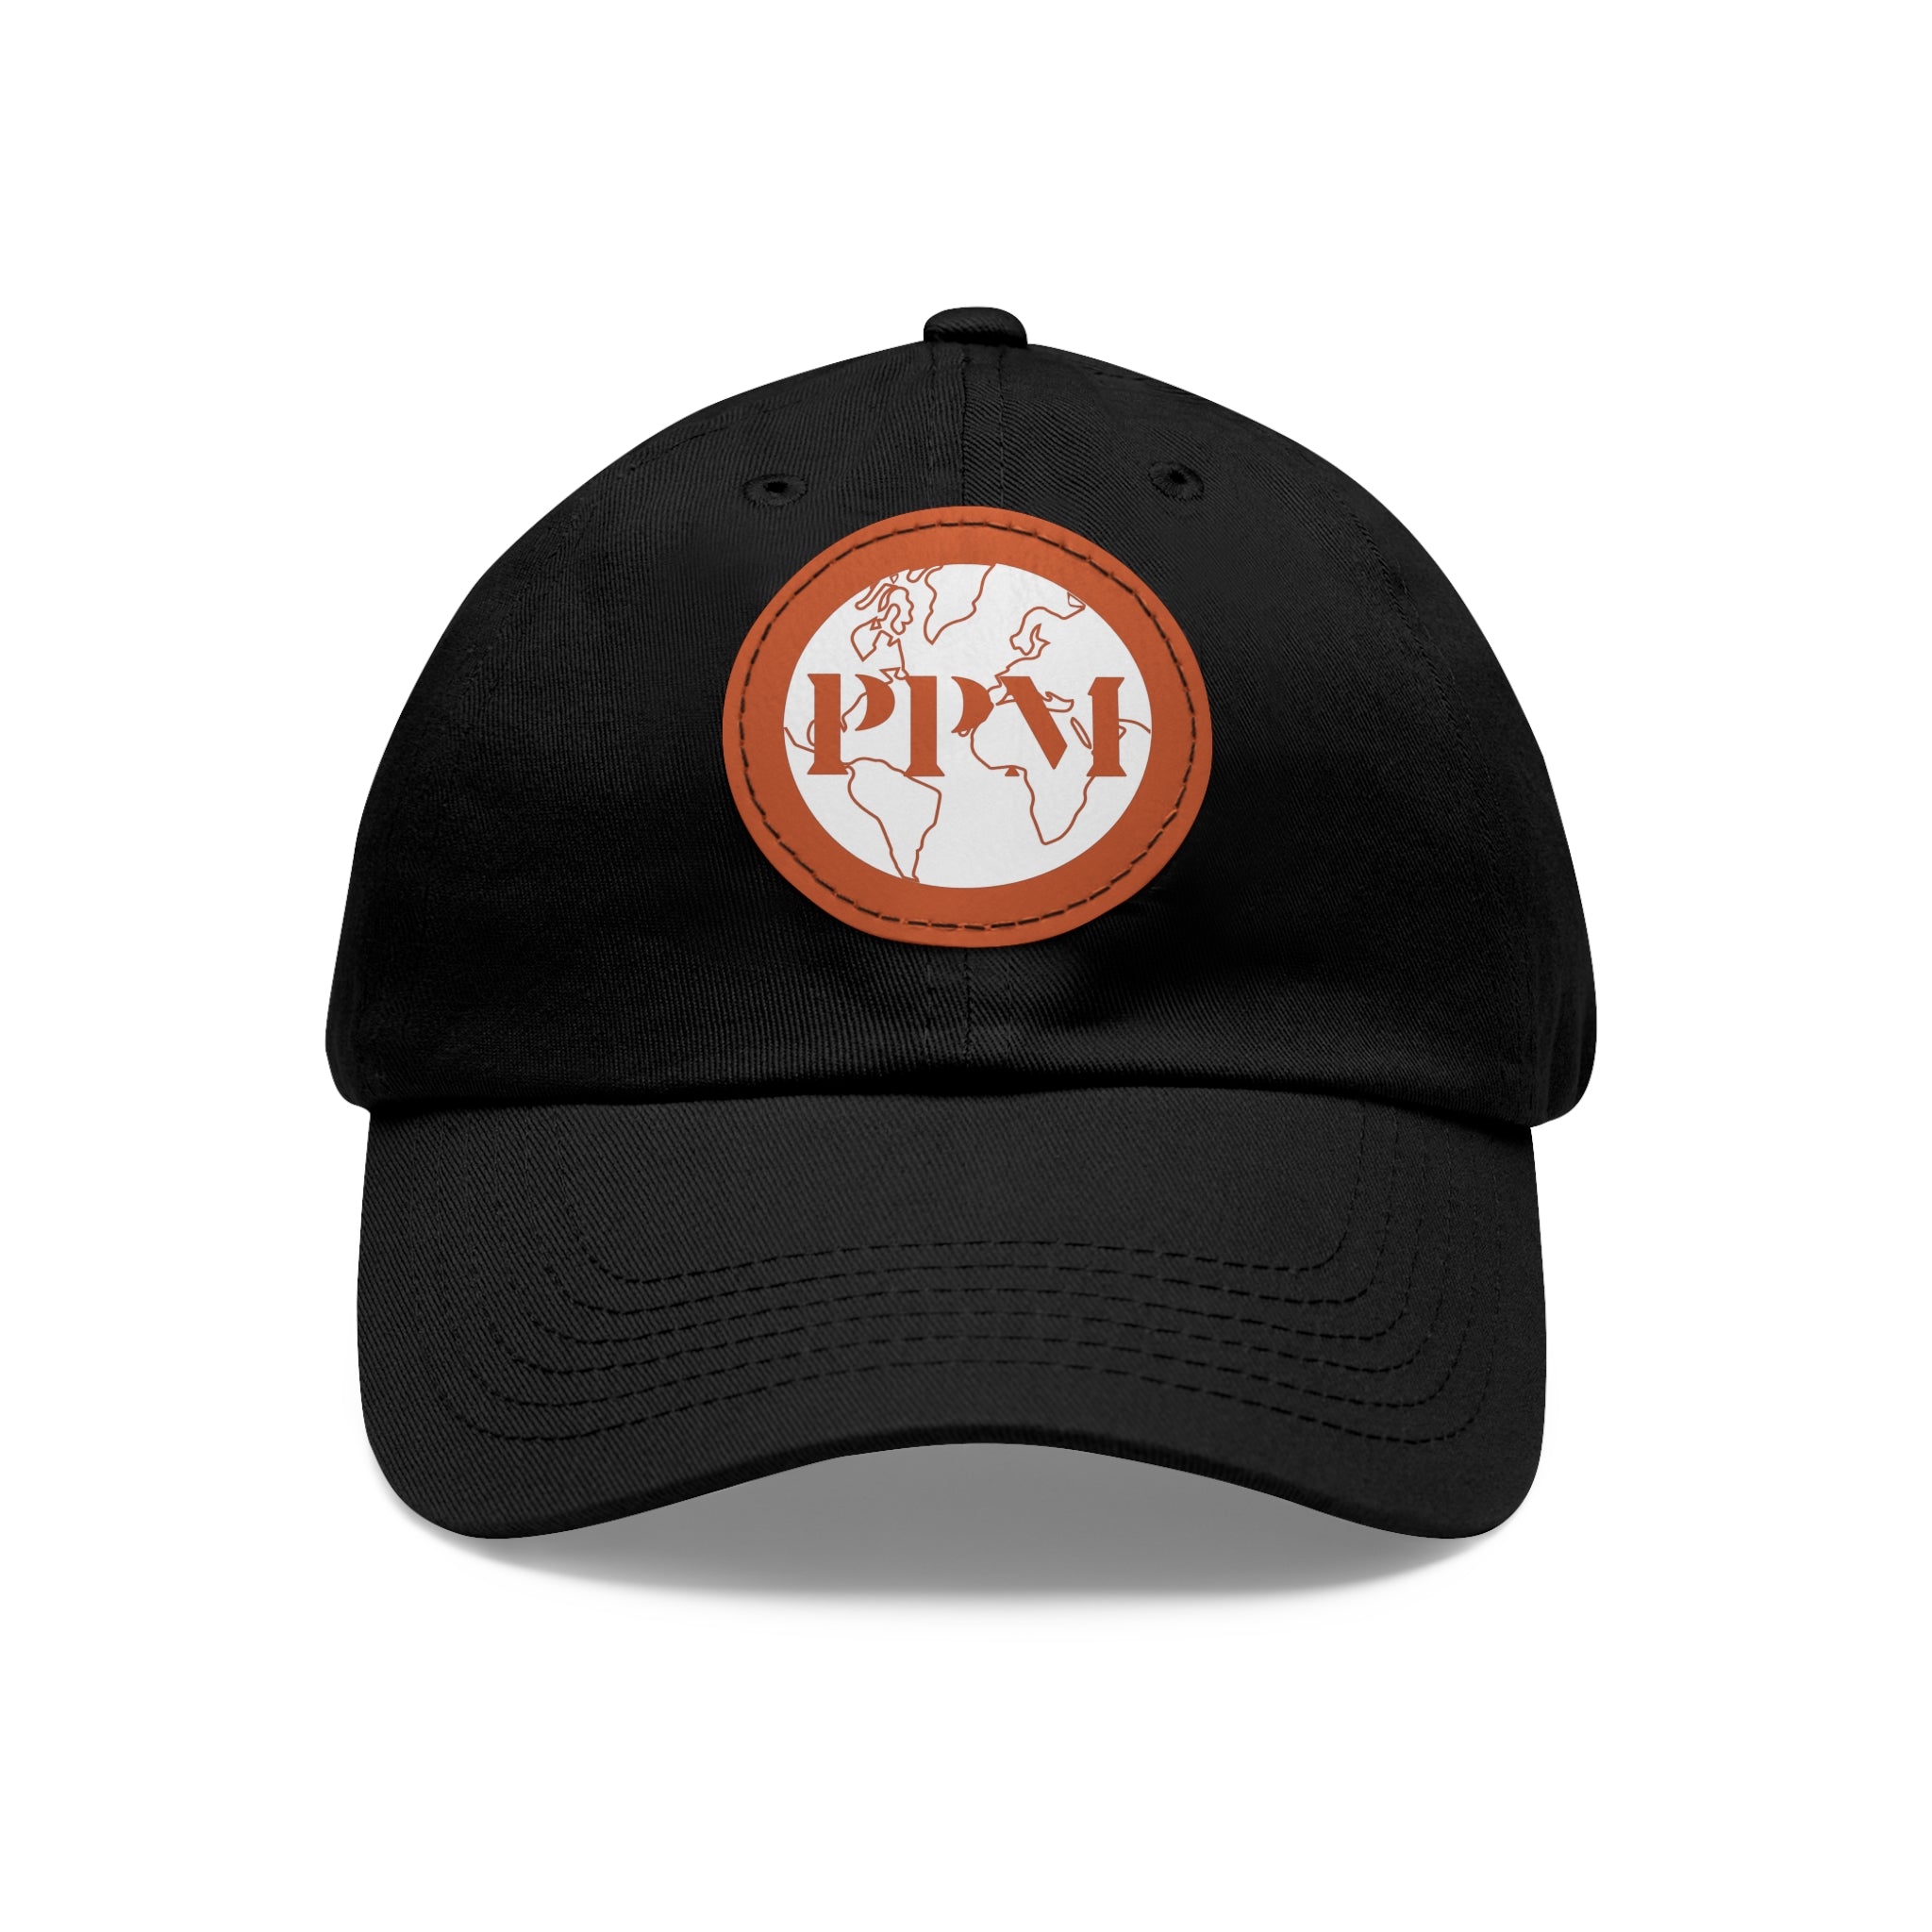 PPM Logo Leather Patch Hat